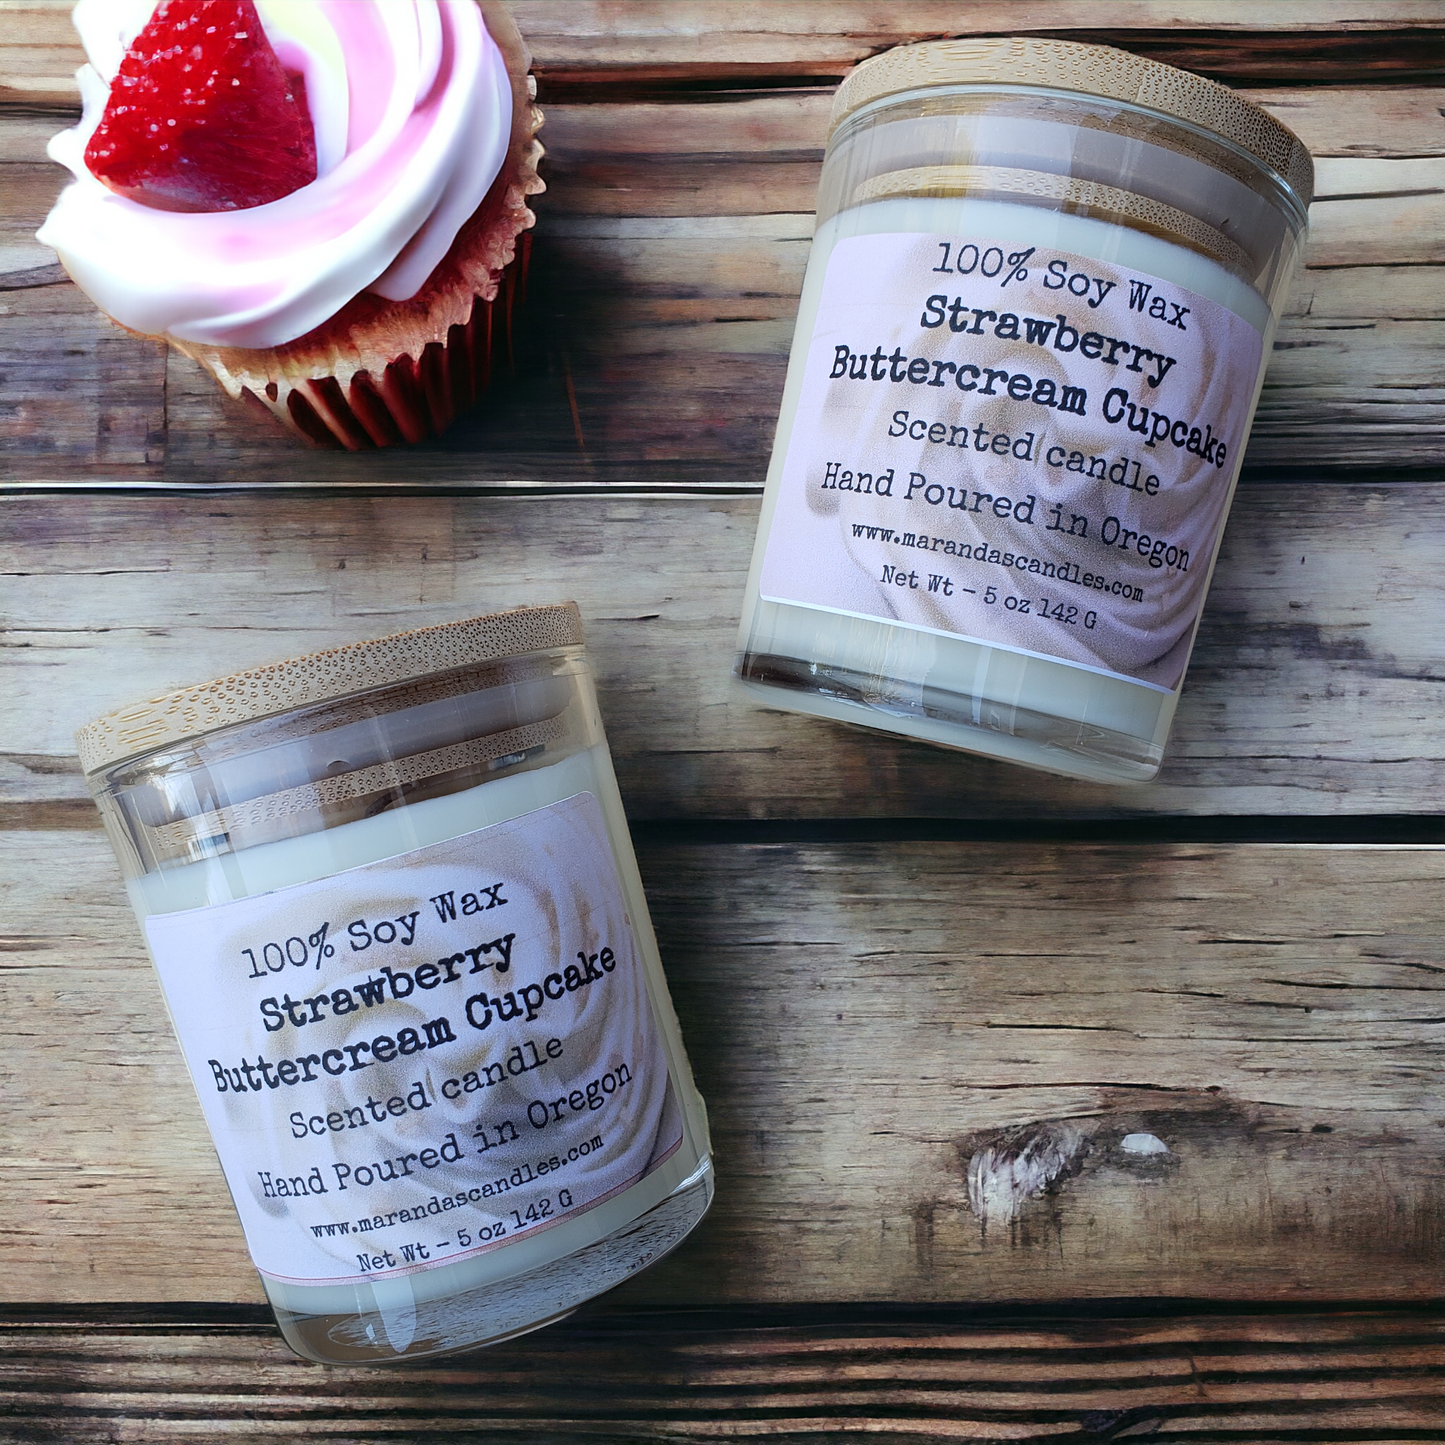 Strawberry Buttercream Cupcake Scented Soy Wax Candle/Wax Melts